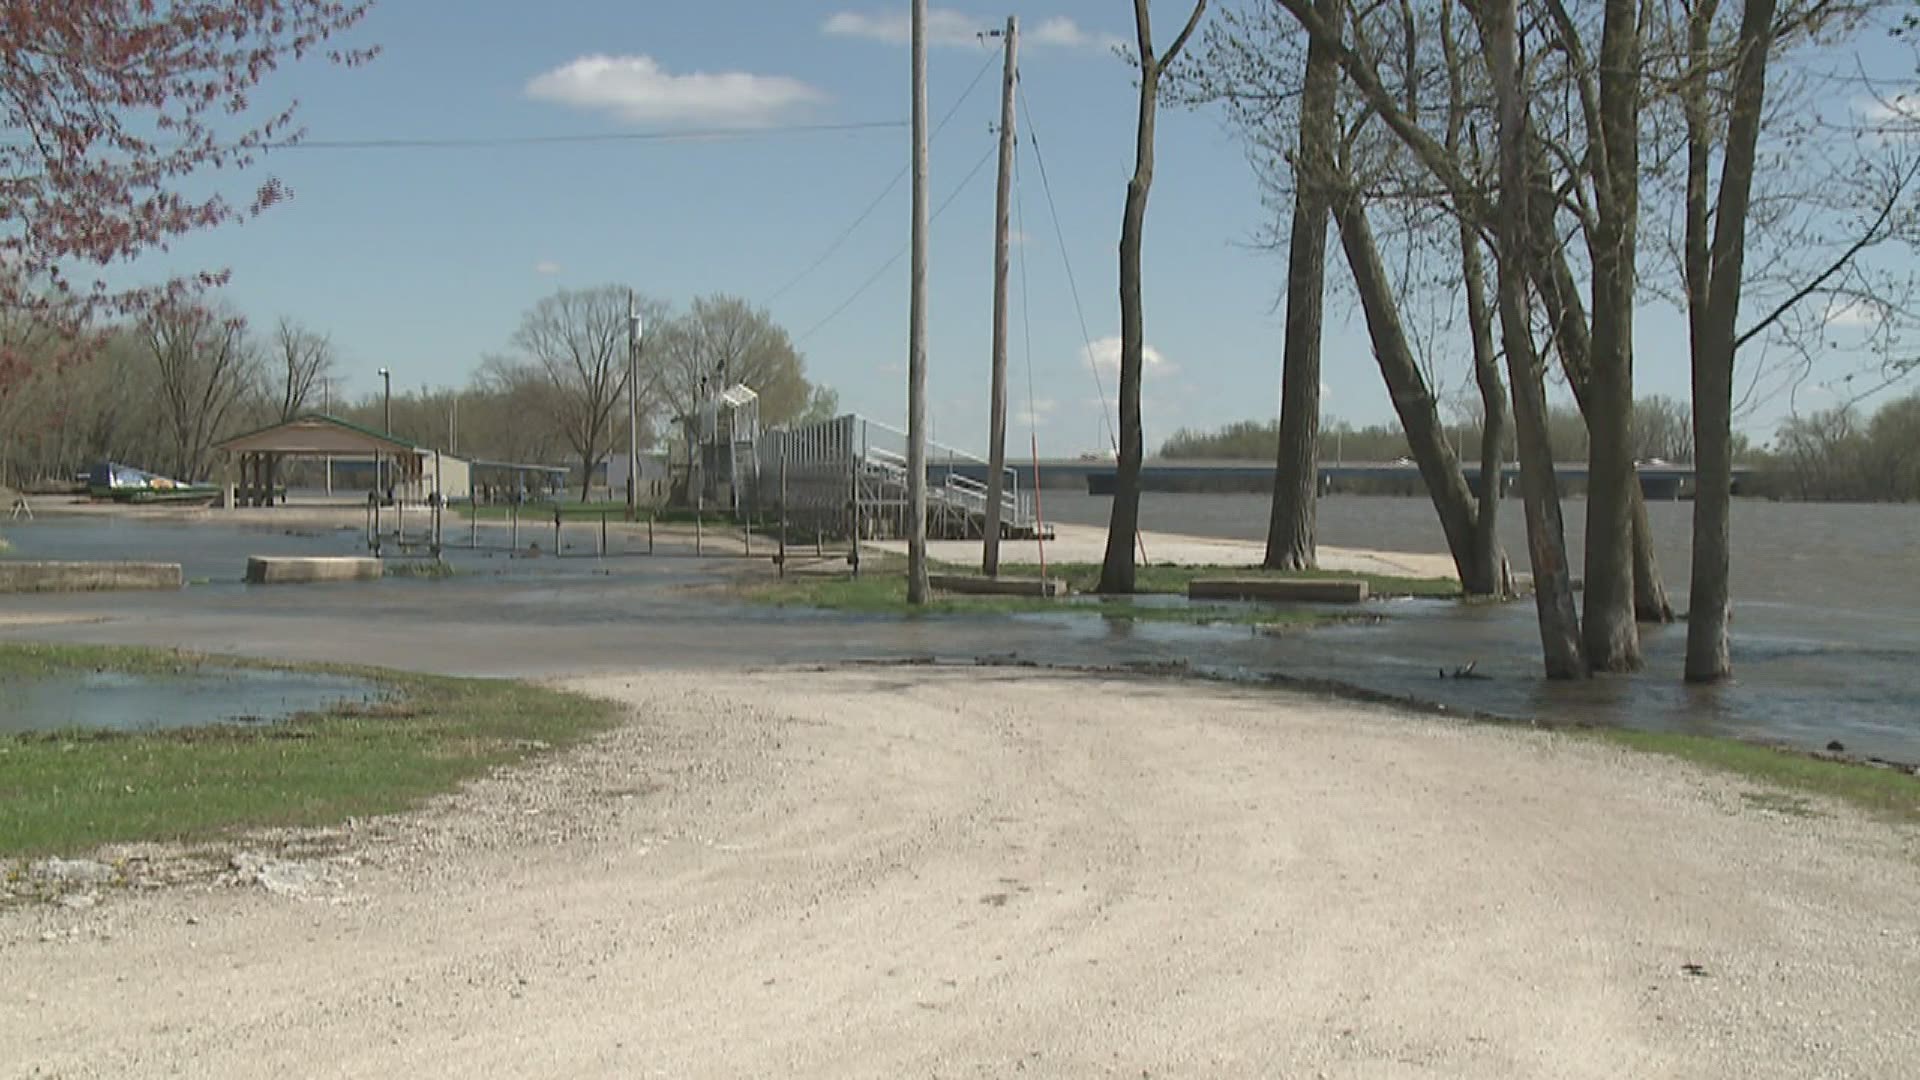 The City recommends that boaters avoid the Rock River west of Ben Williamson Park near the Steel Dam due to safety issues created by high water levels.